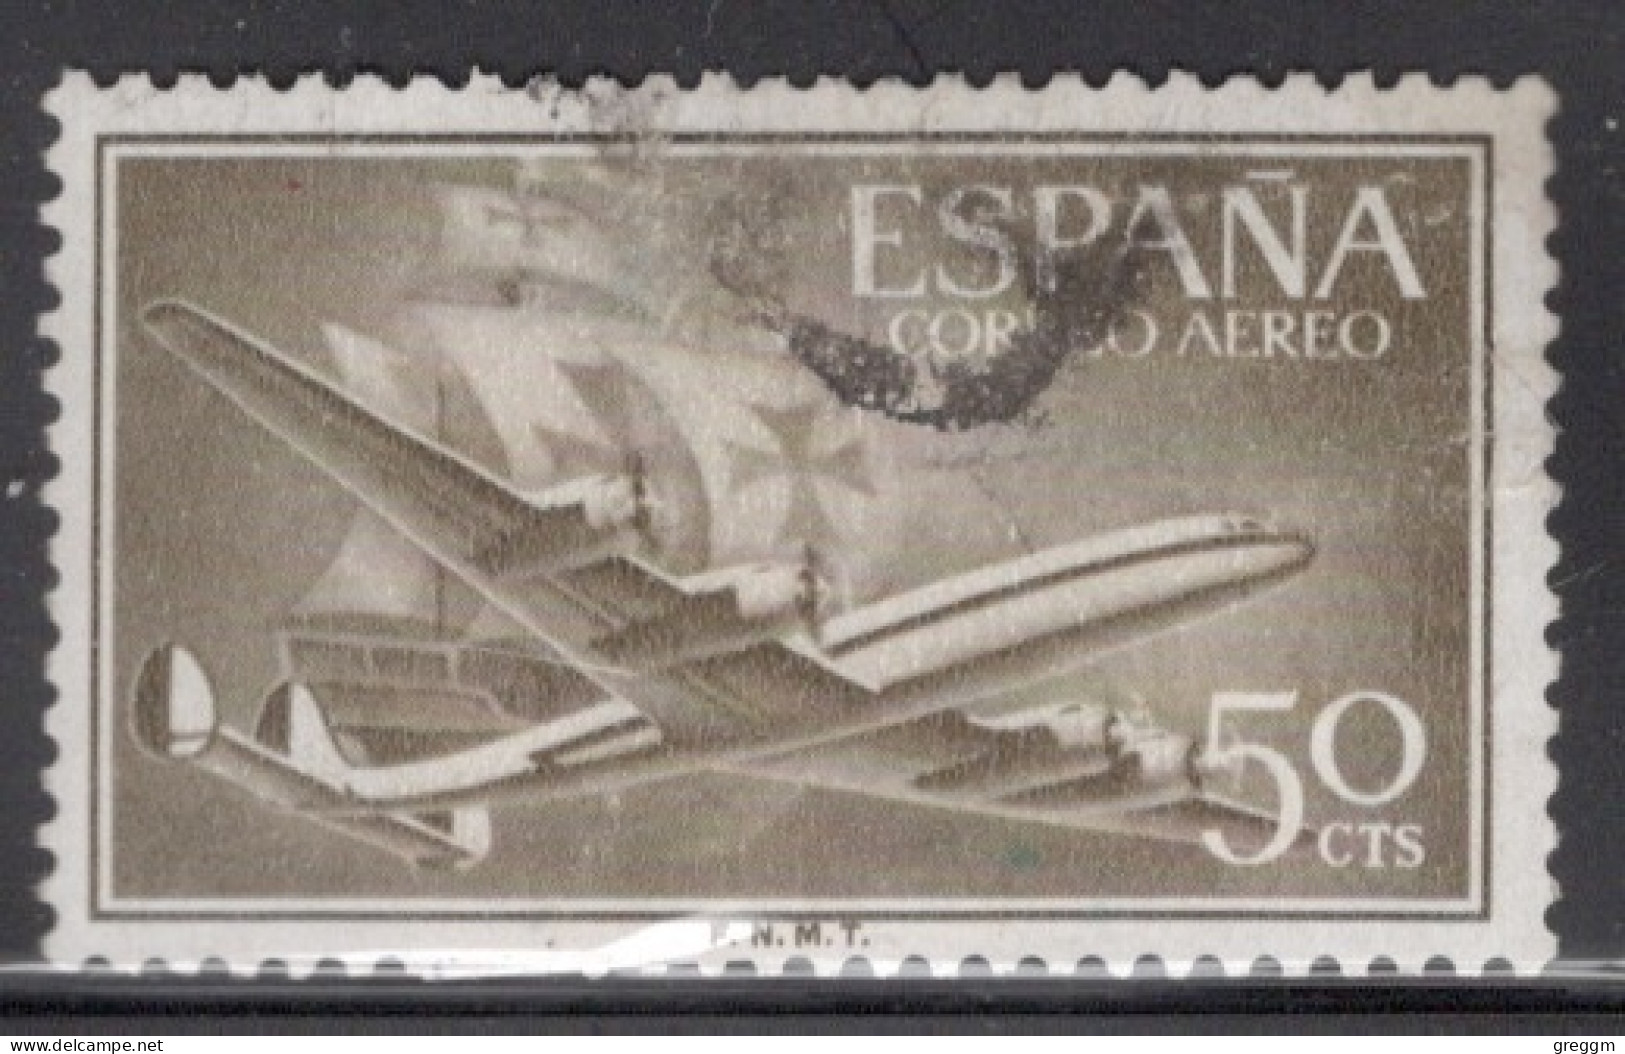 Spain 1955 Single Stamp Issued As An Airmail Definitive In Fine Used. - Usados